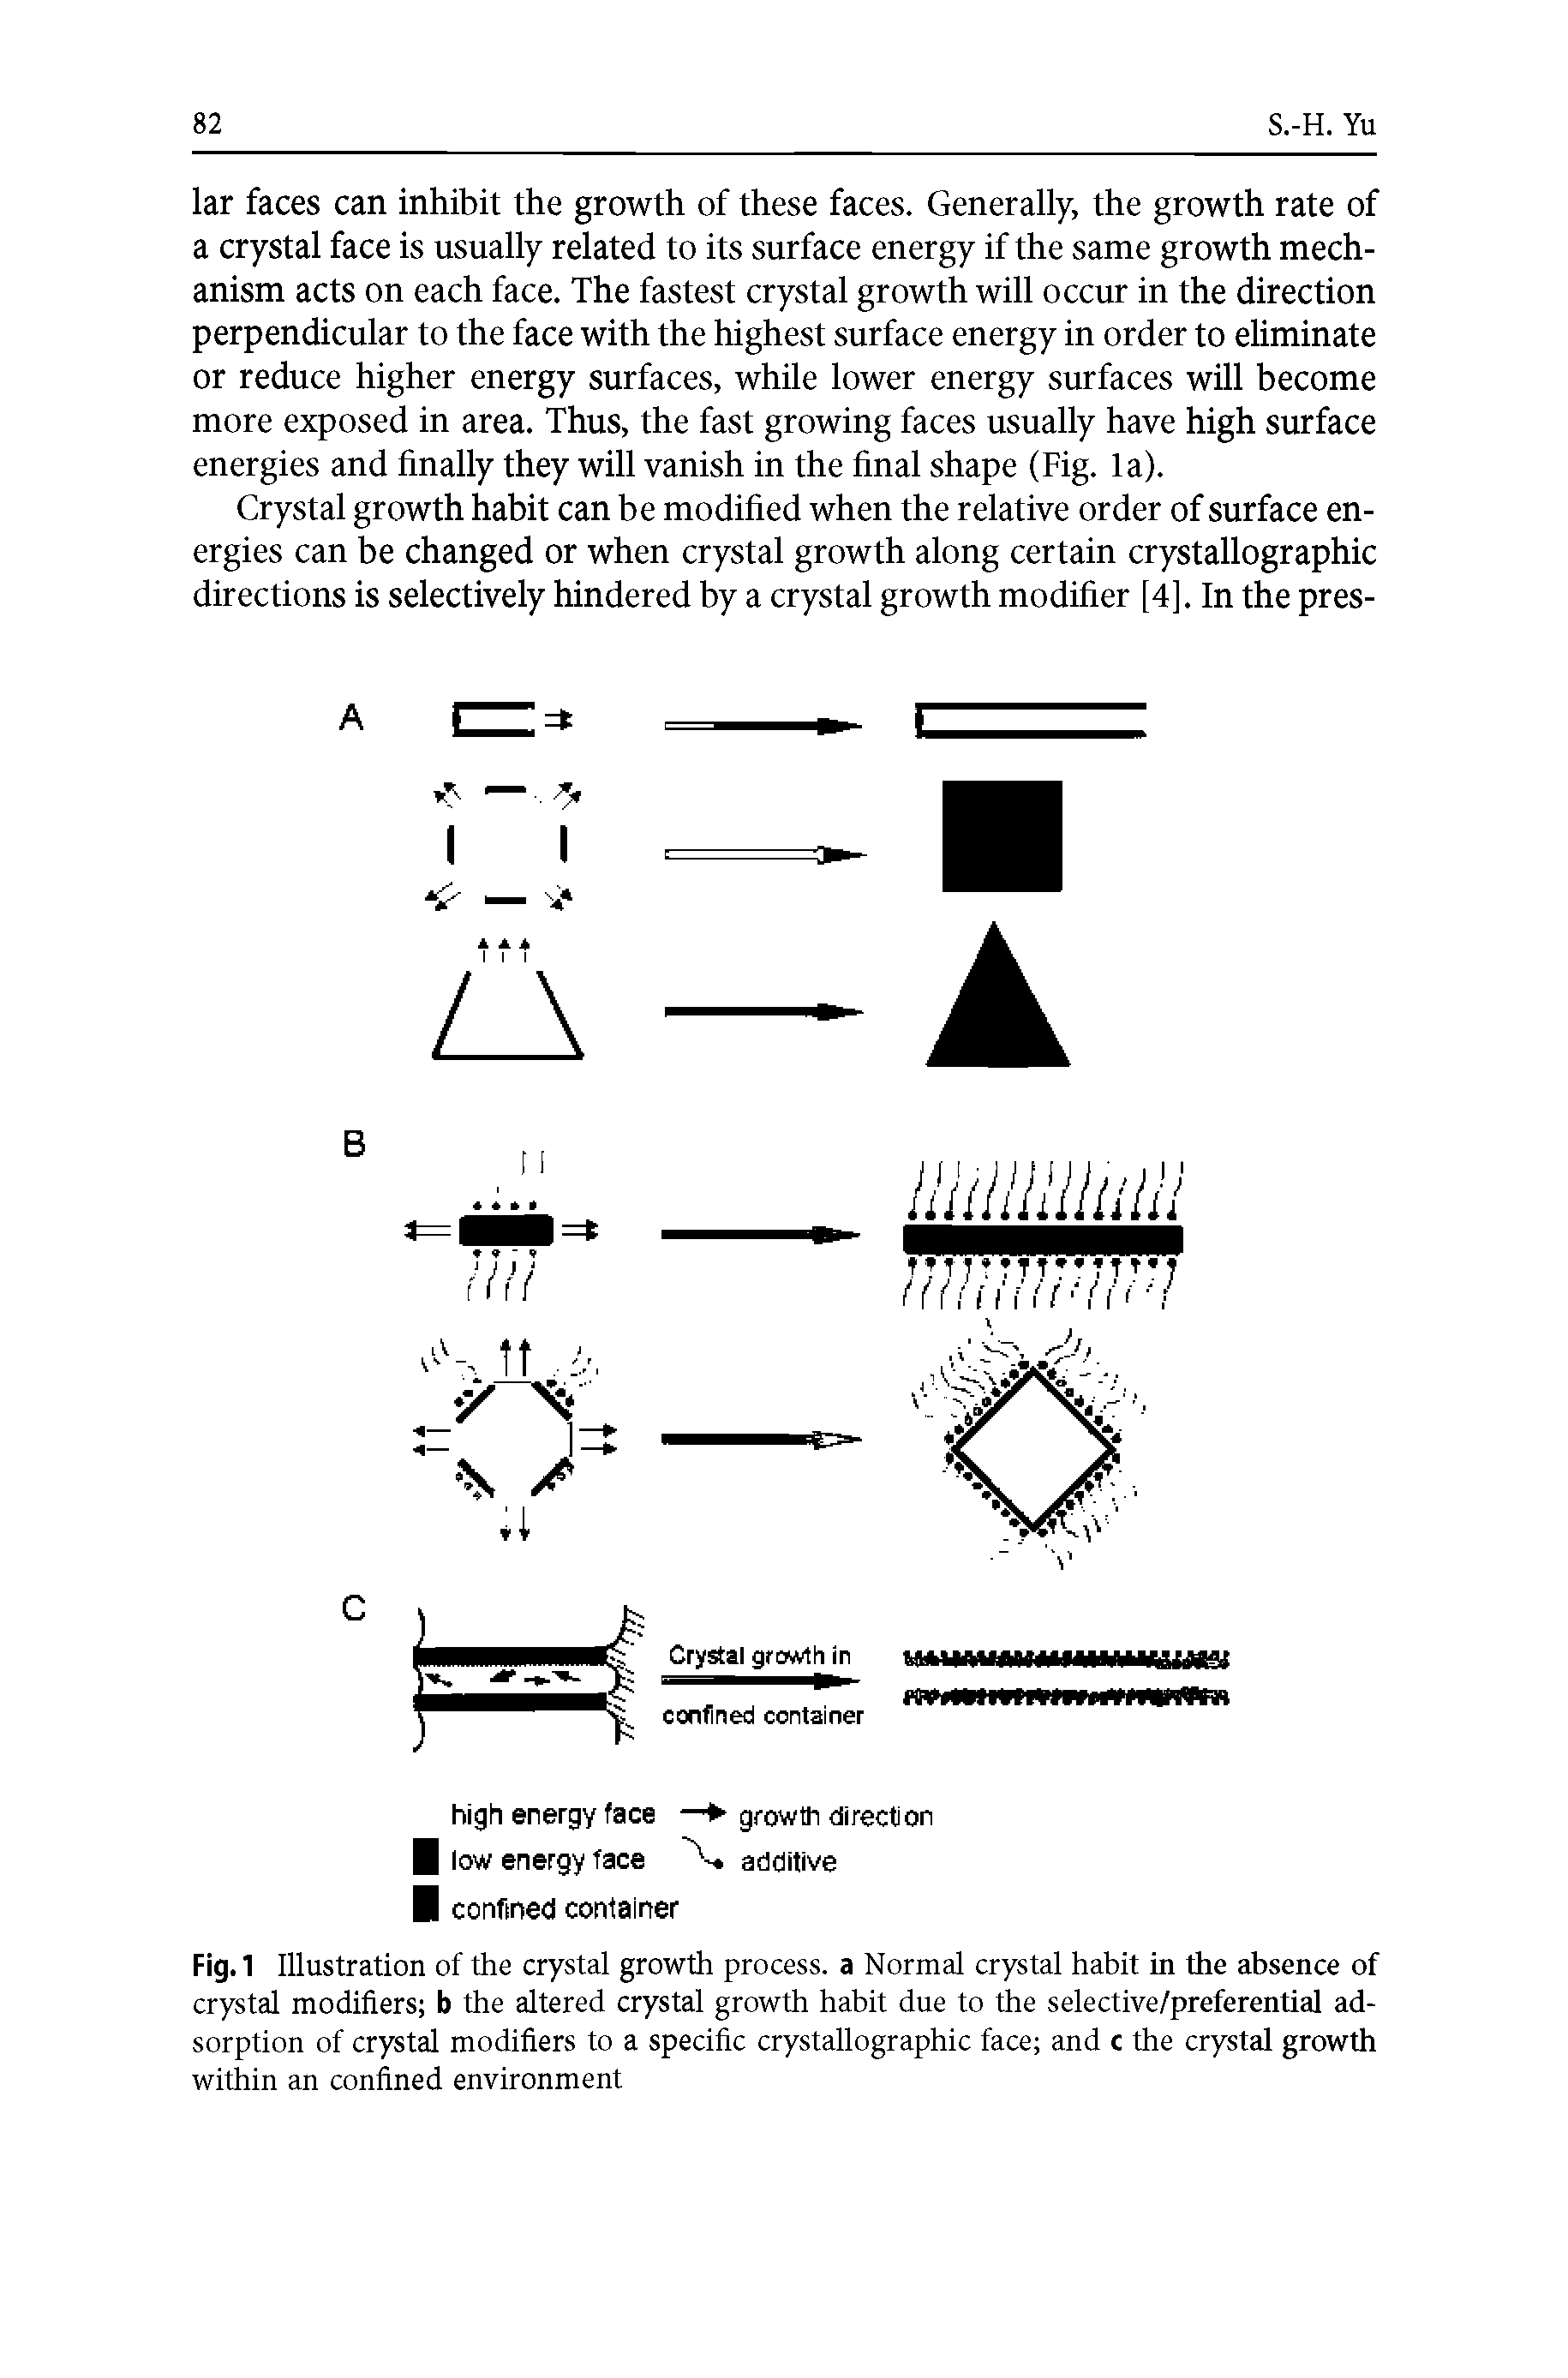 Fig.1 Illustration of the crystal growth process, a Normal crystal habit in the absence of crystal modifiers b the altered crystal growth habit due to the selective/preferential adsorption of crystal modifiers to a specific crystallographic face and c the crystal growth within an confined environment...